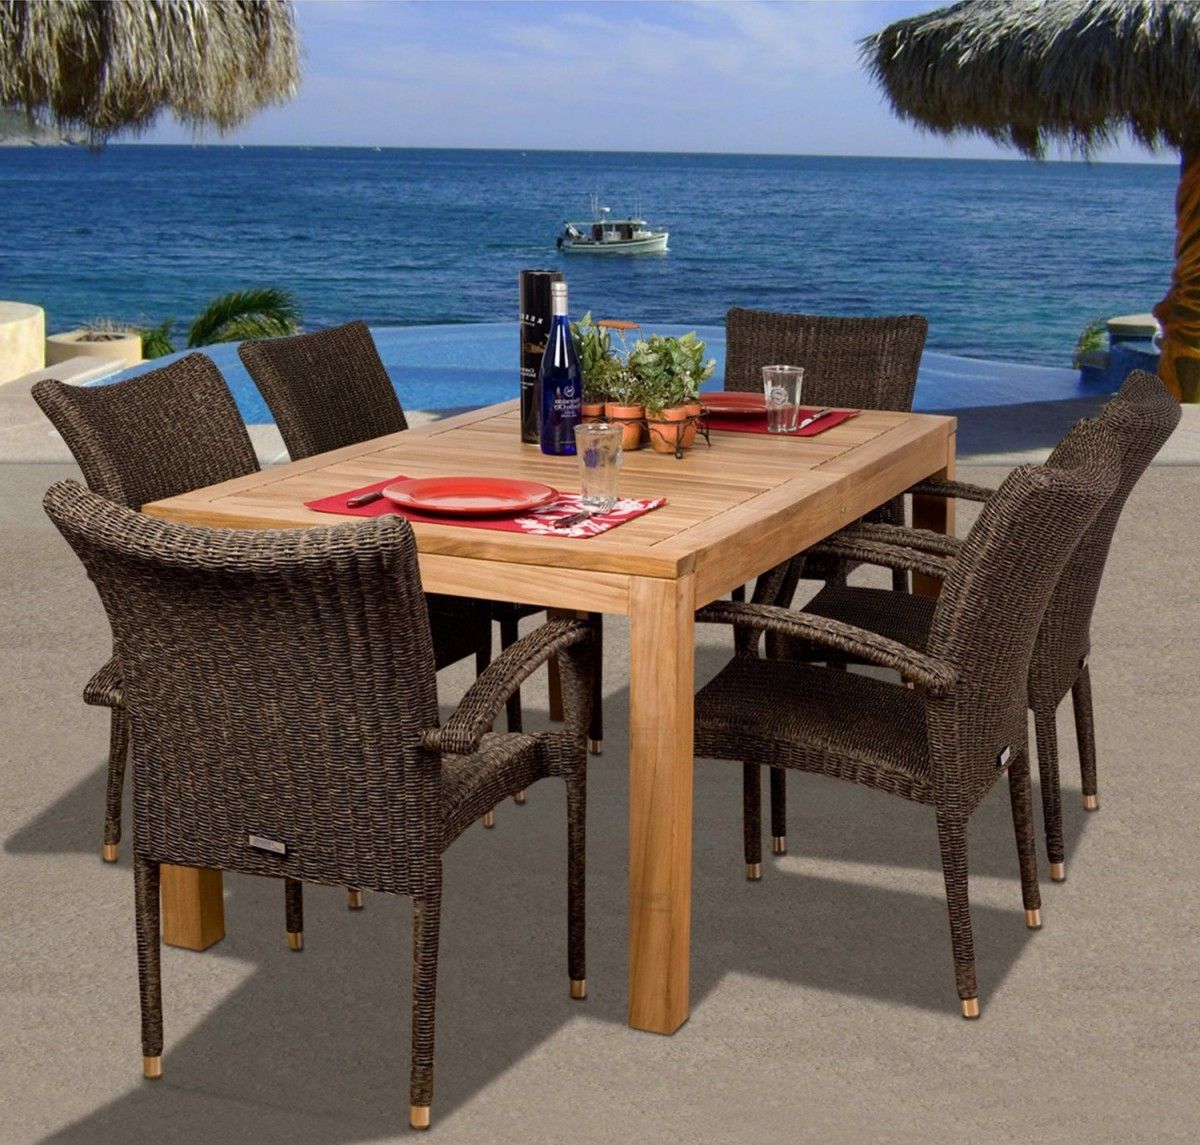 Amazonia Teak Brussels 7 Piece Teak Outdoor Dining Set With Stackable Pertaining To 2020 7 Pieces Teak Outdoor Dining Sets (View 12 of 15)